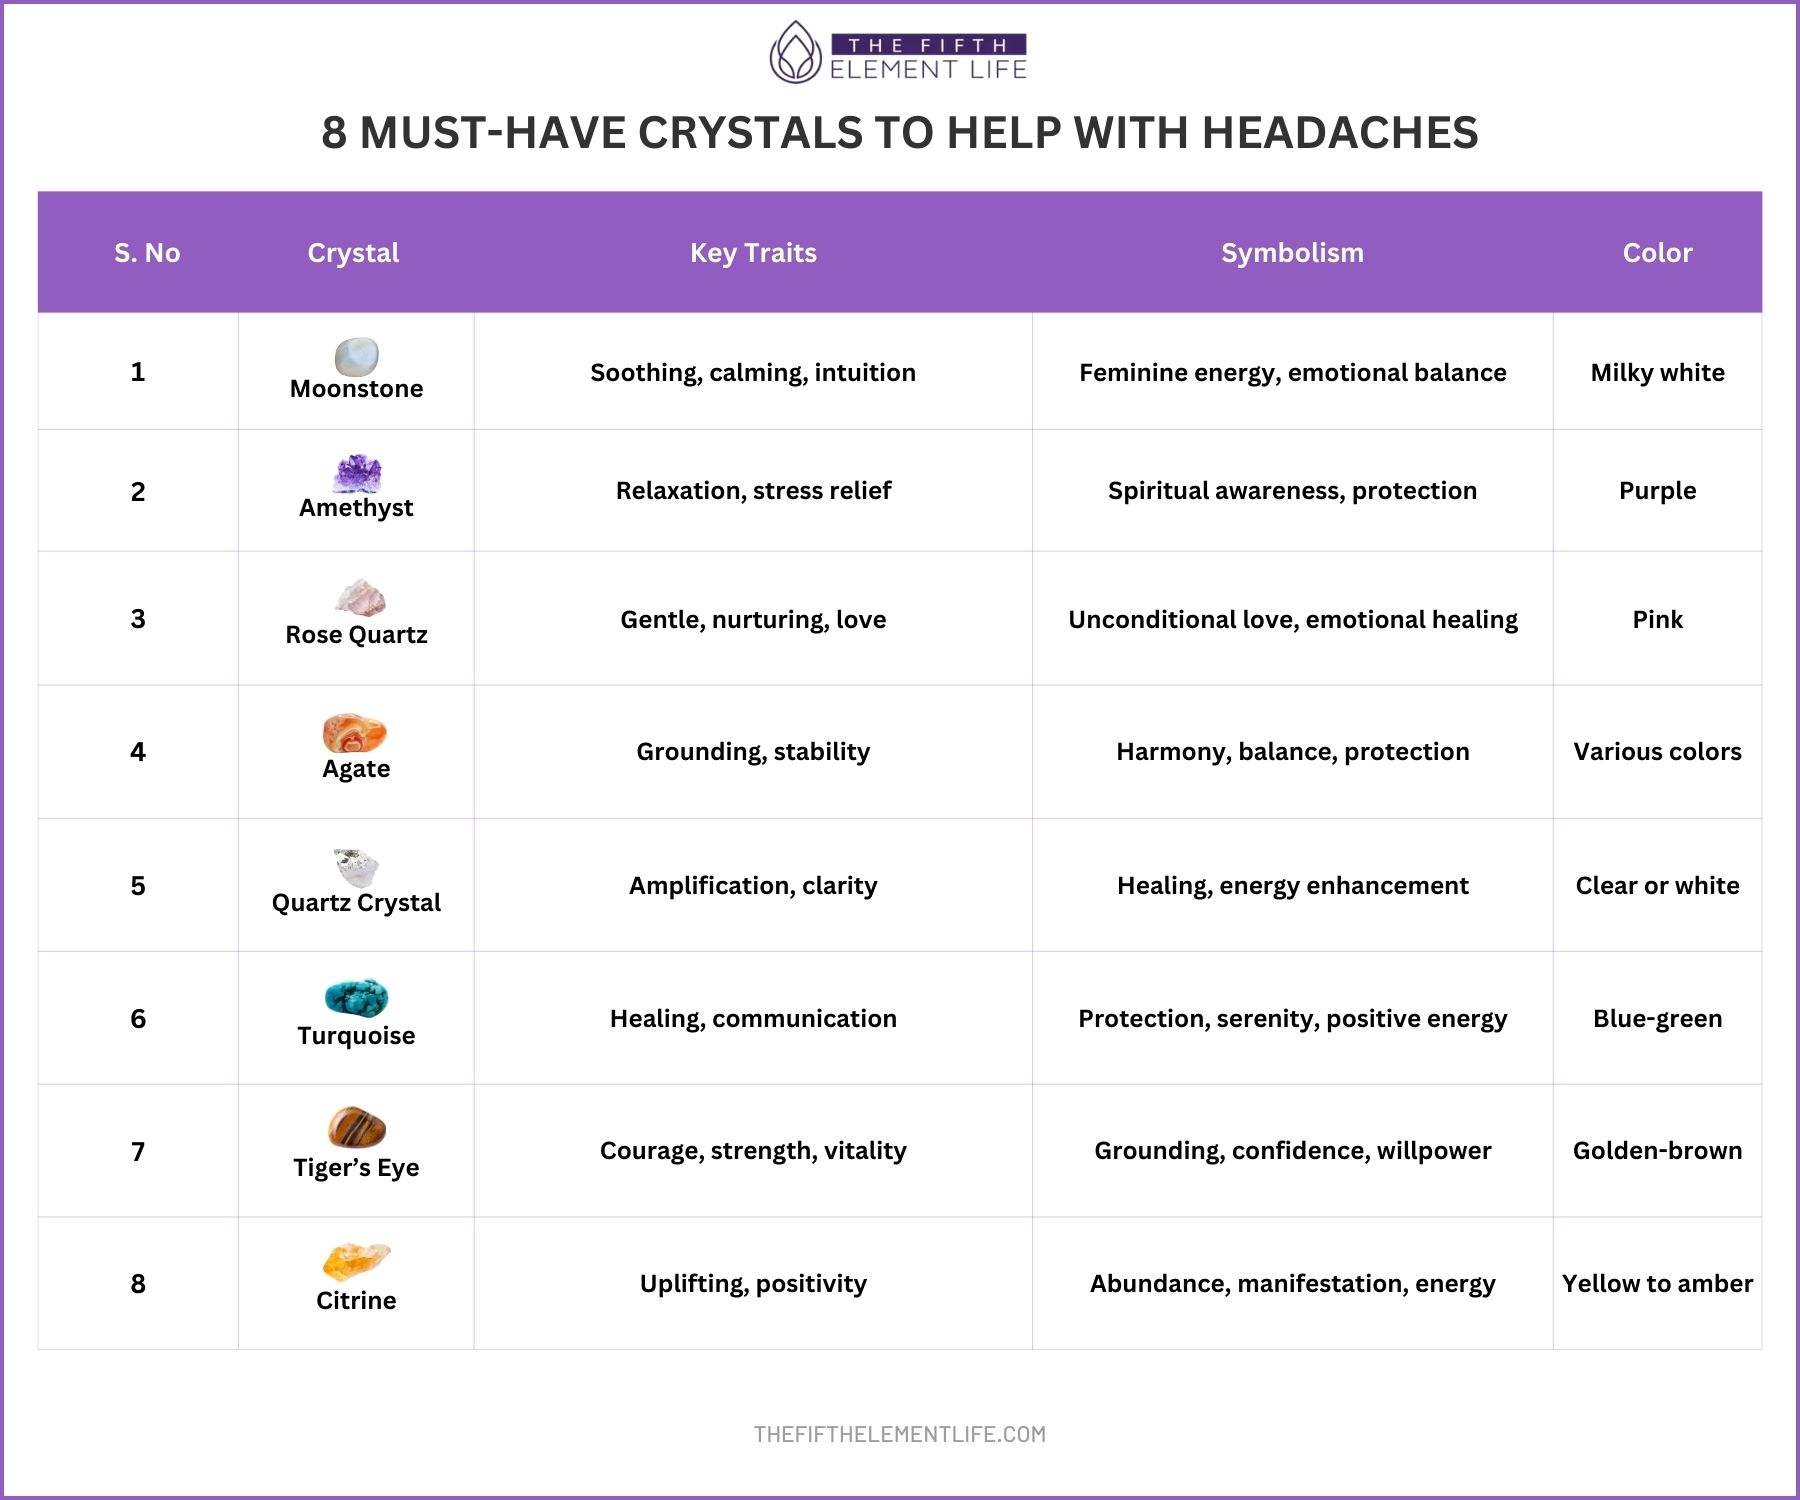 8 Must-Have Crystals To Help With Headaches